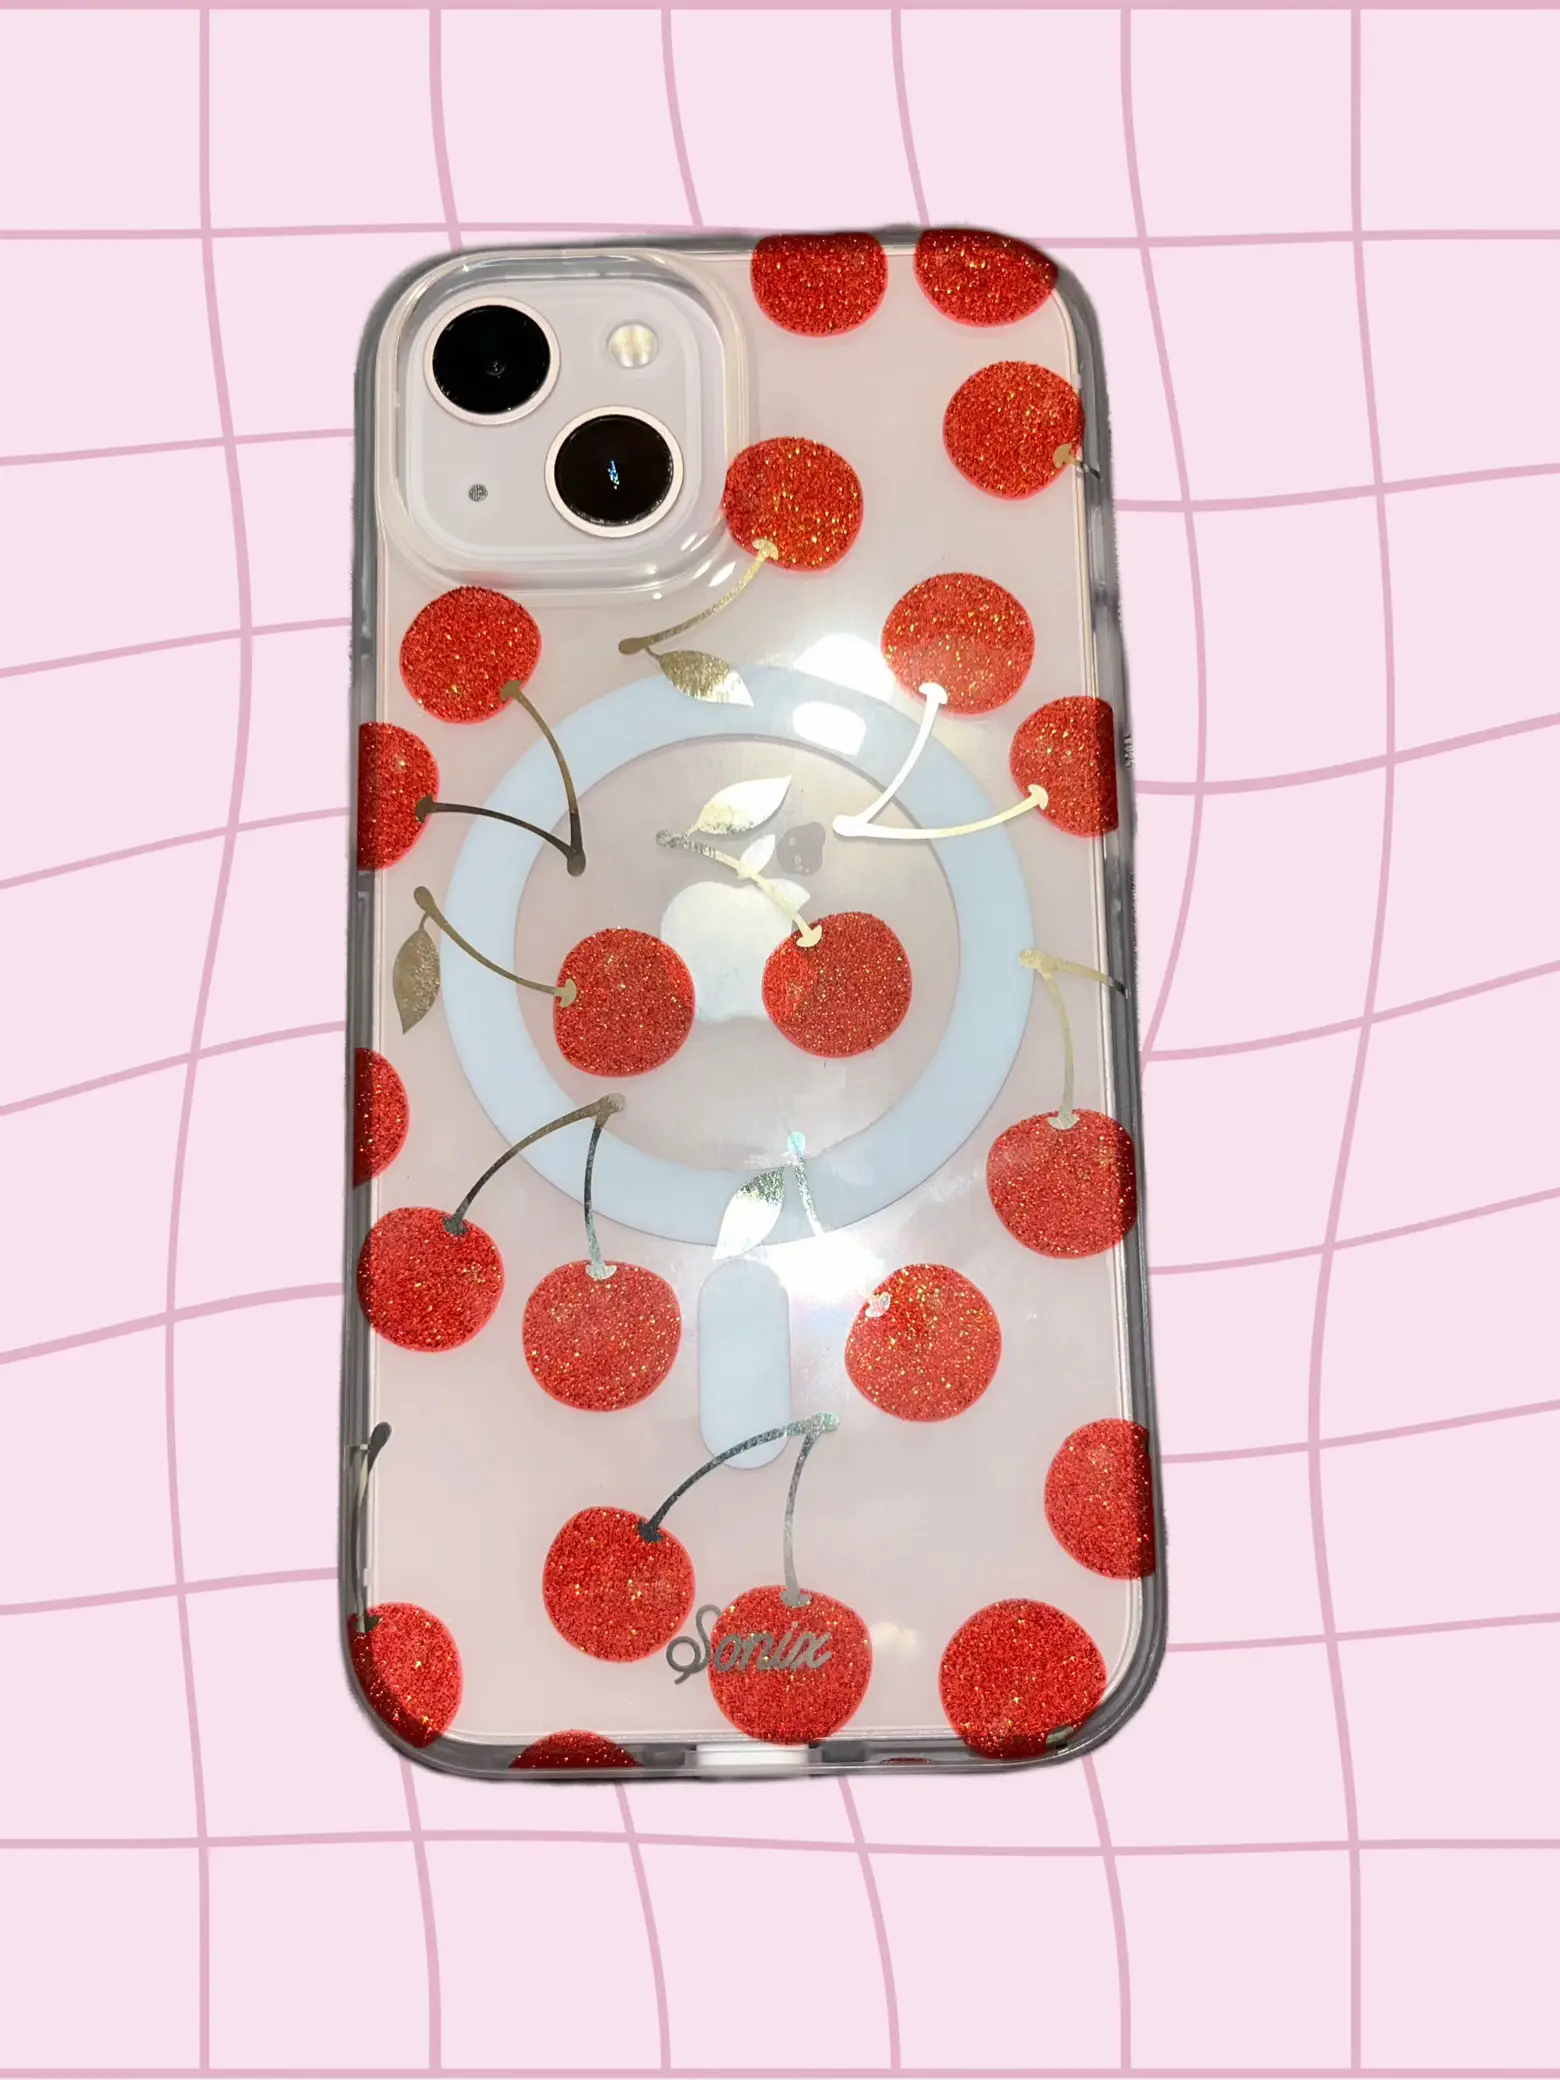 MZELQ Compatible with iPhone XR Case Red Strawberry Cute Pattern, Soft TPU  iPhone XR Case for Girls Women + 1* Screen Protector, Camera Hole